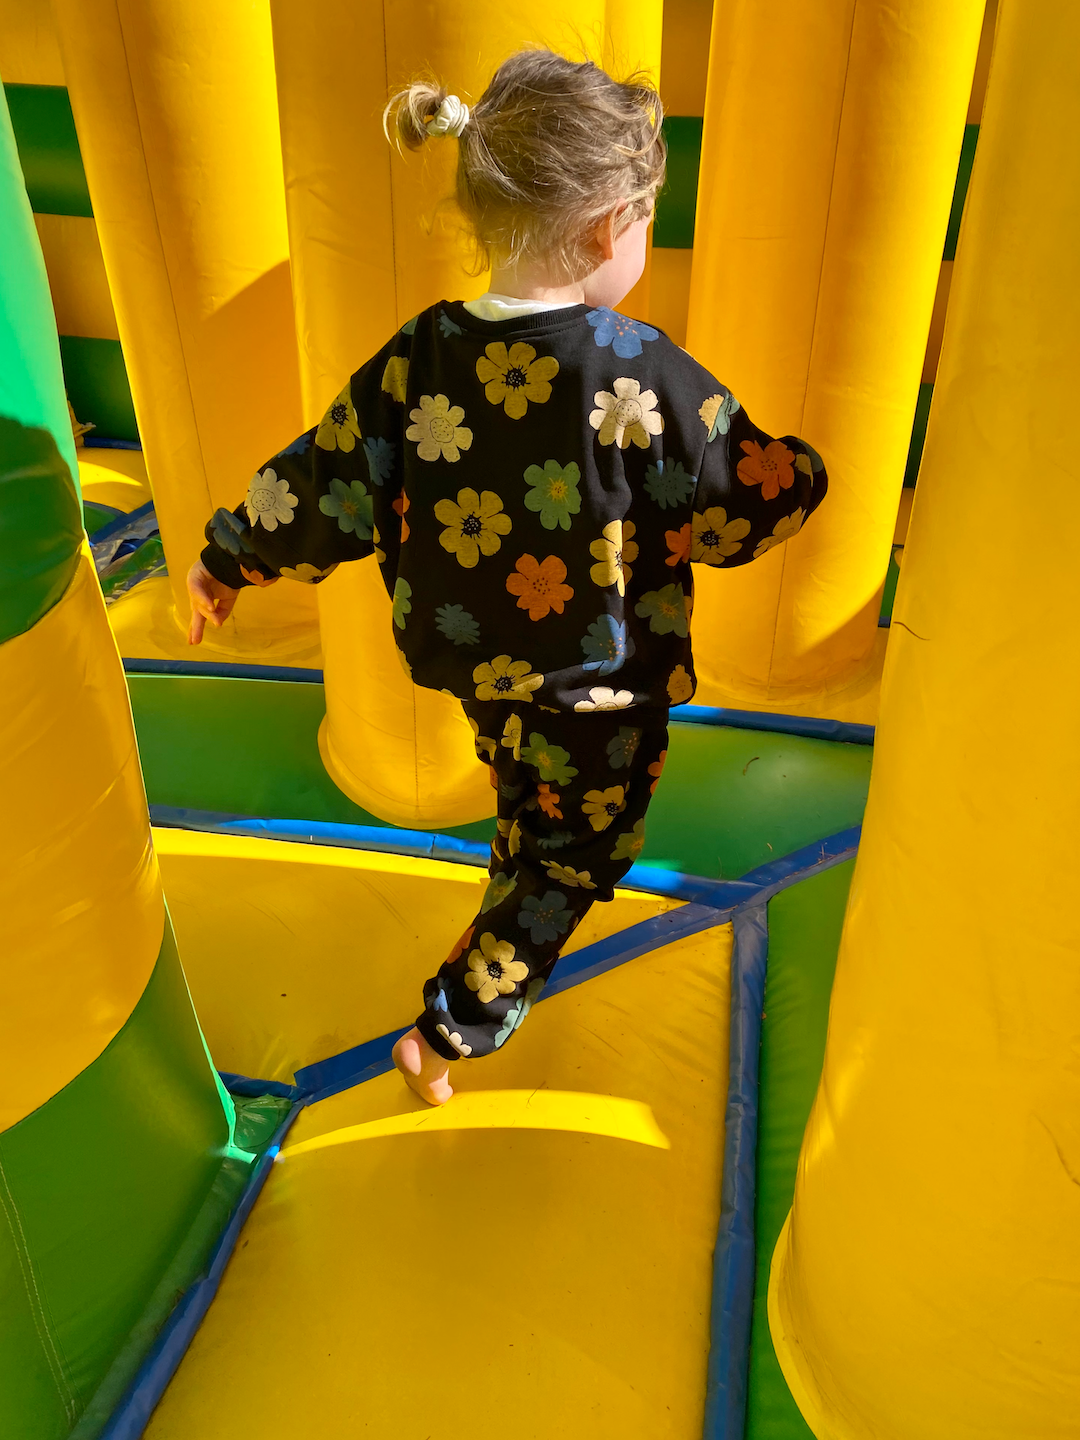 A child on a bouncy castle wearing a kids' sweatshirt and pants set in black, printed with yellow, orange, green, blue and white flowers